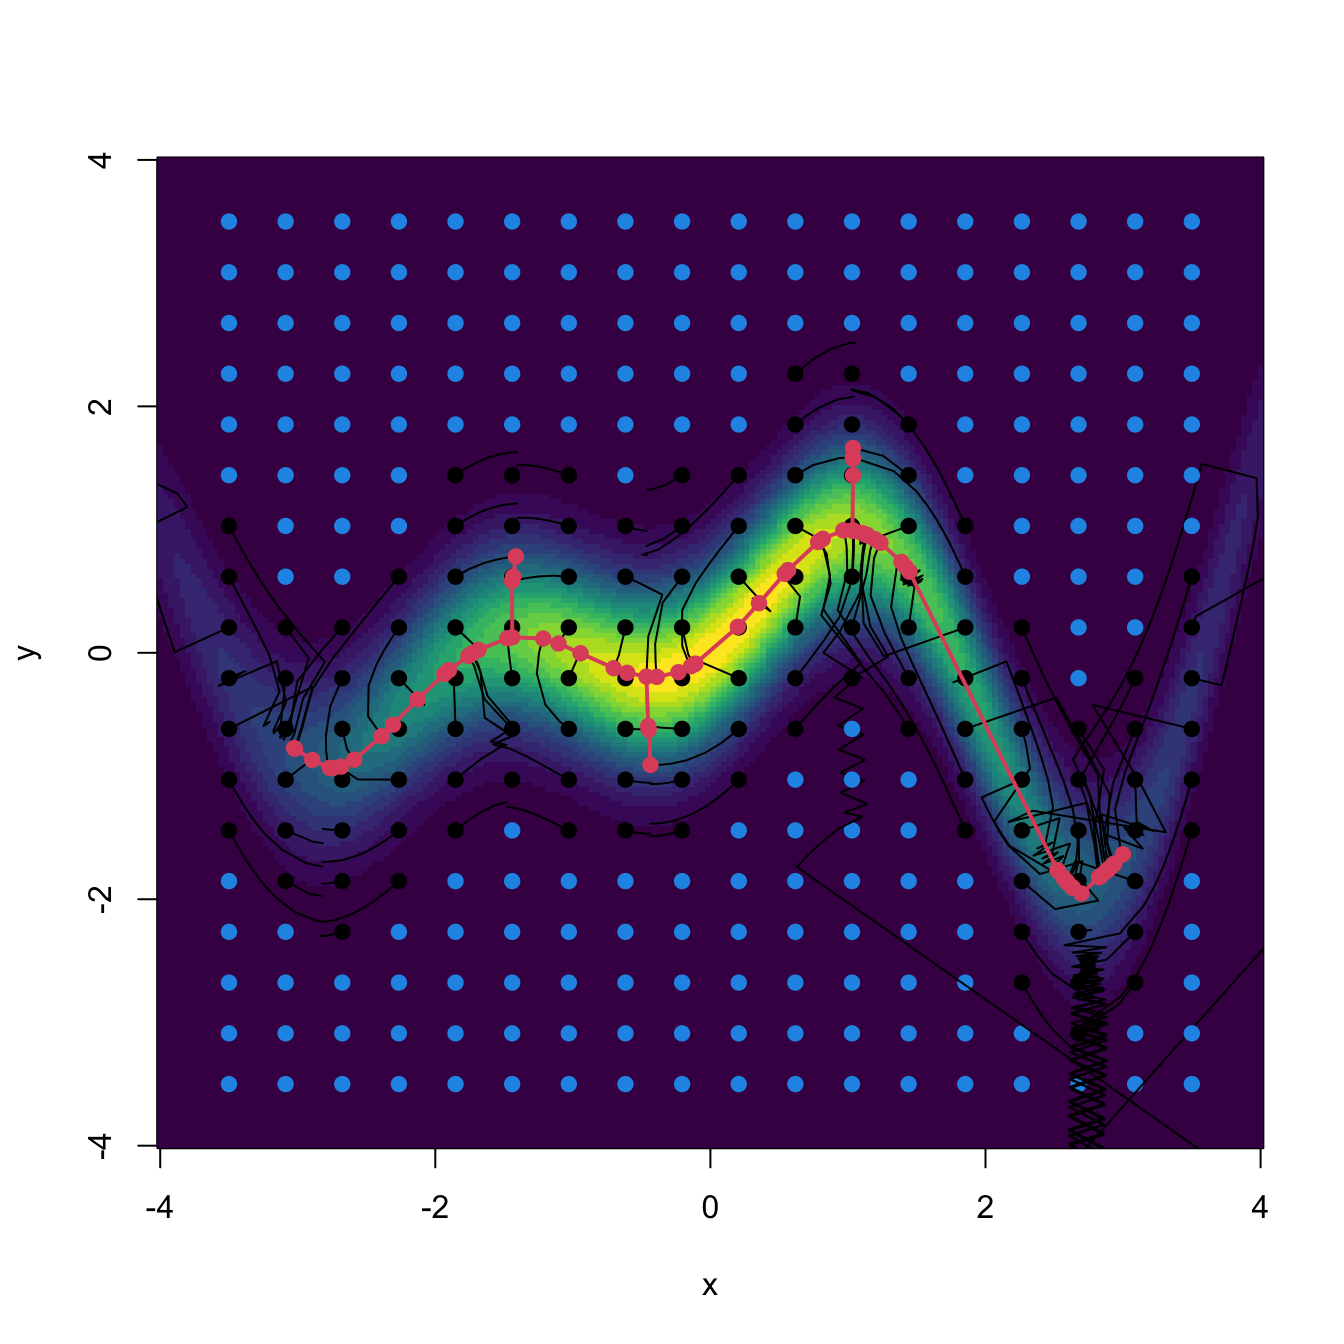 Highly non-normal densities and the construction of their density ridges. In blue, the points \(\mathbf{x}_0\) that lie on low-density regions and are skipped from the Euler algorithm (longer running times and not useful output). In red, the final points \(\mathbf{x}\) that lie on ridges on high-density regions (thus excluding ill-defined ridges). The red line is the Euclidean minimum spanning tree of the final points.